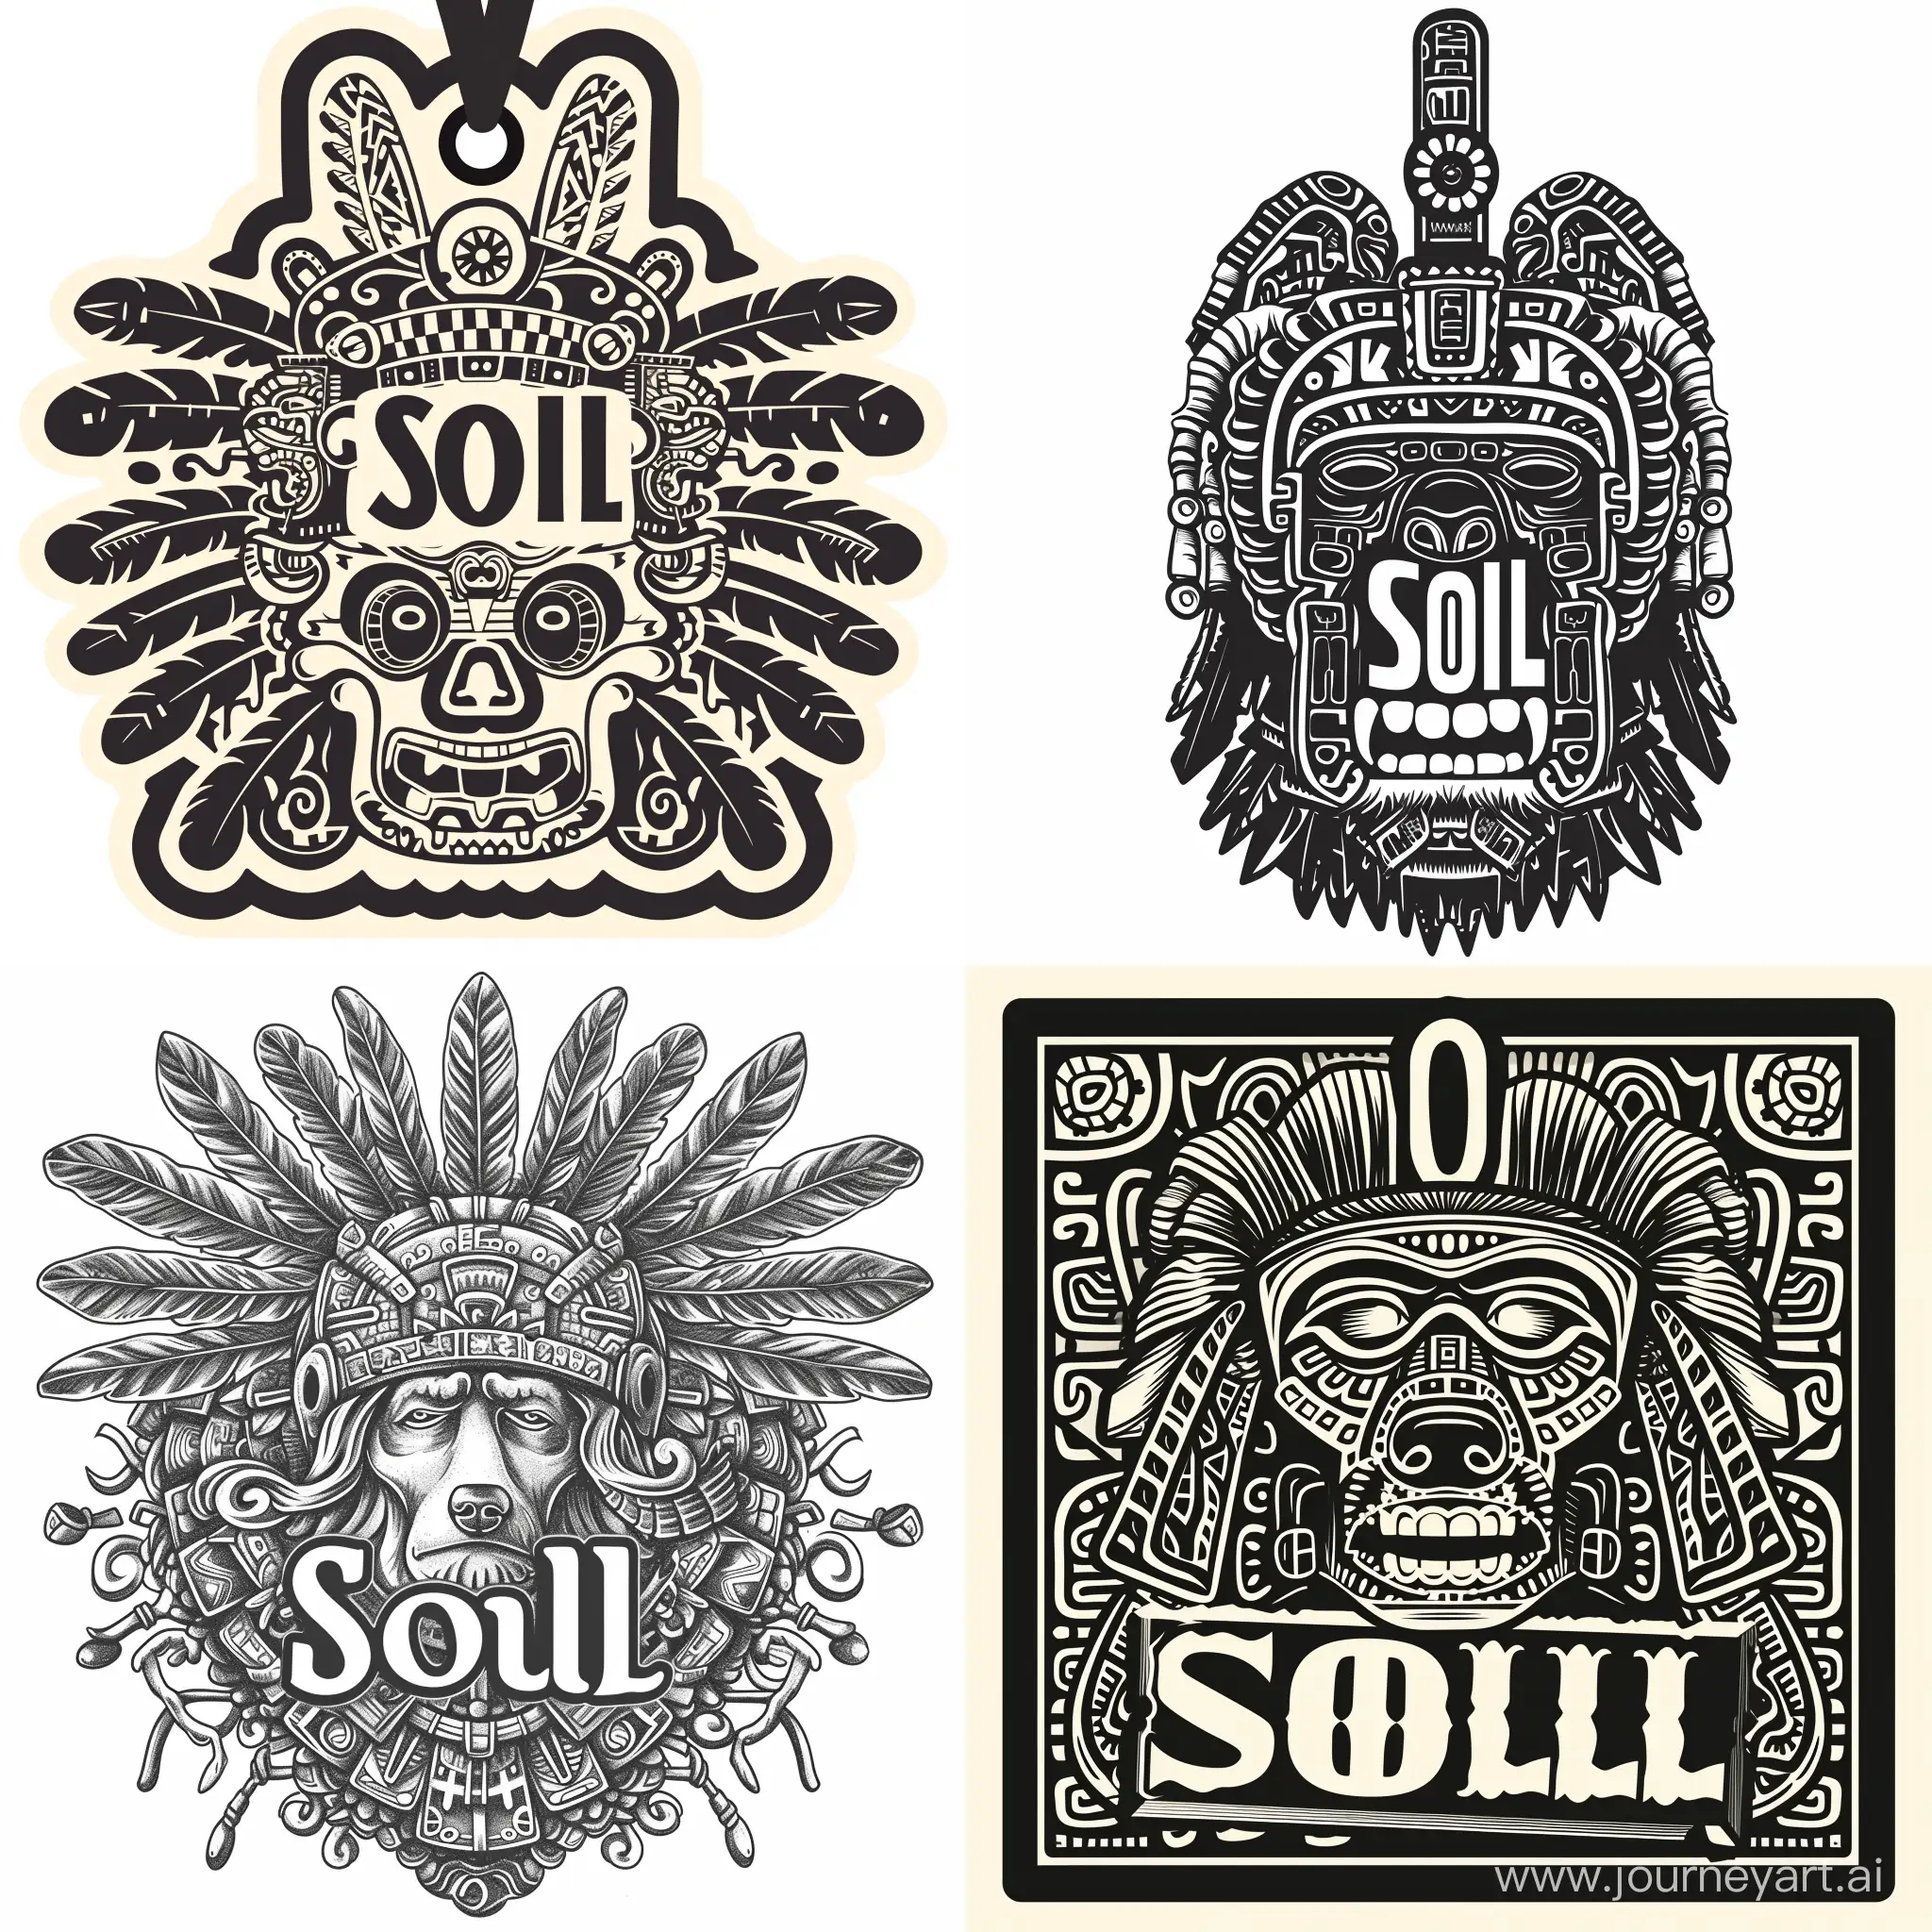 Mayan-and-AztecInspired-Laser-Engraved-Dog-Tag-Customized-for-Soll-22x36mm